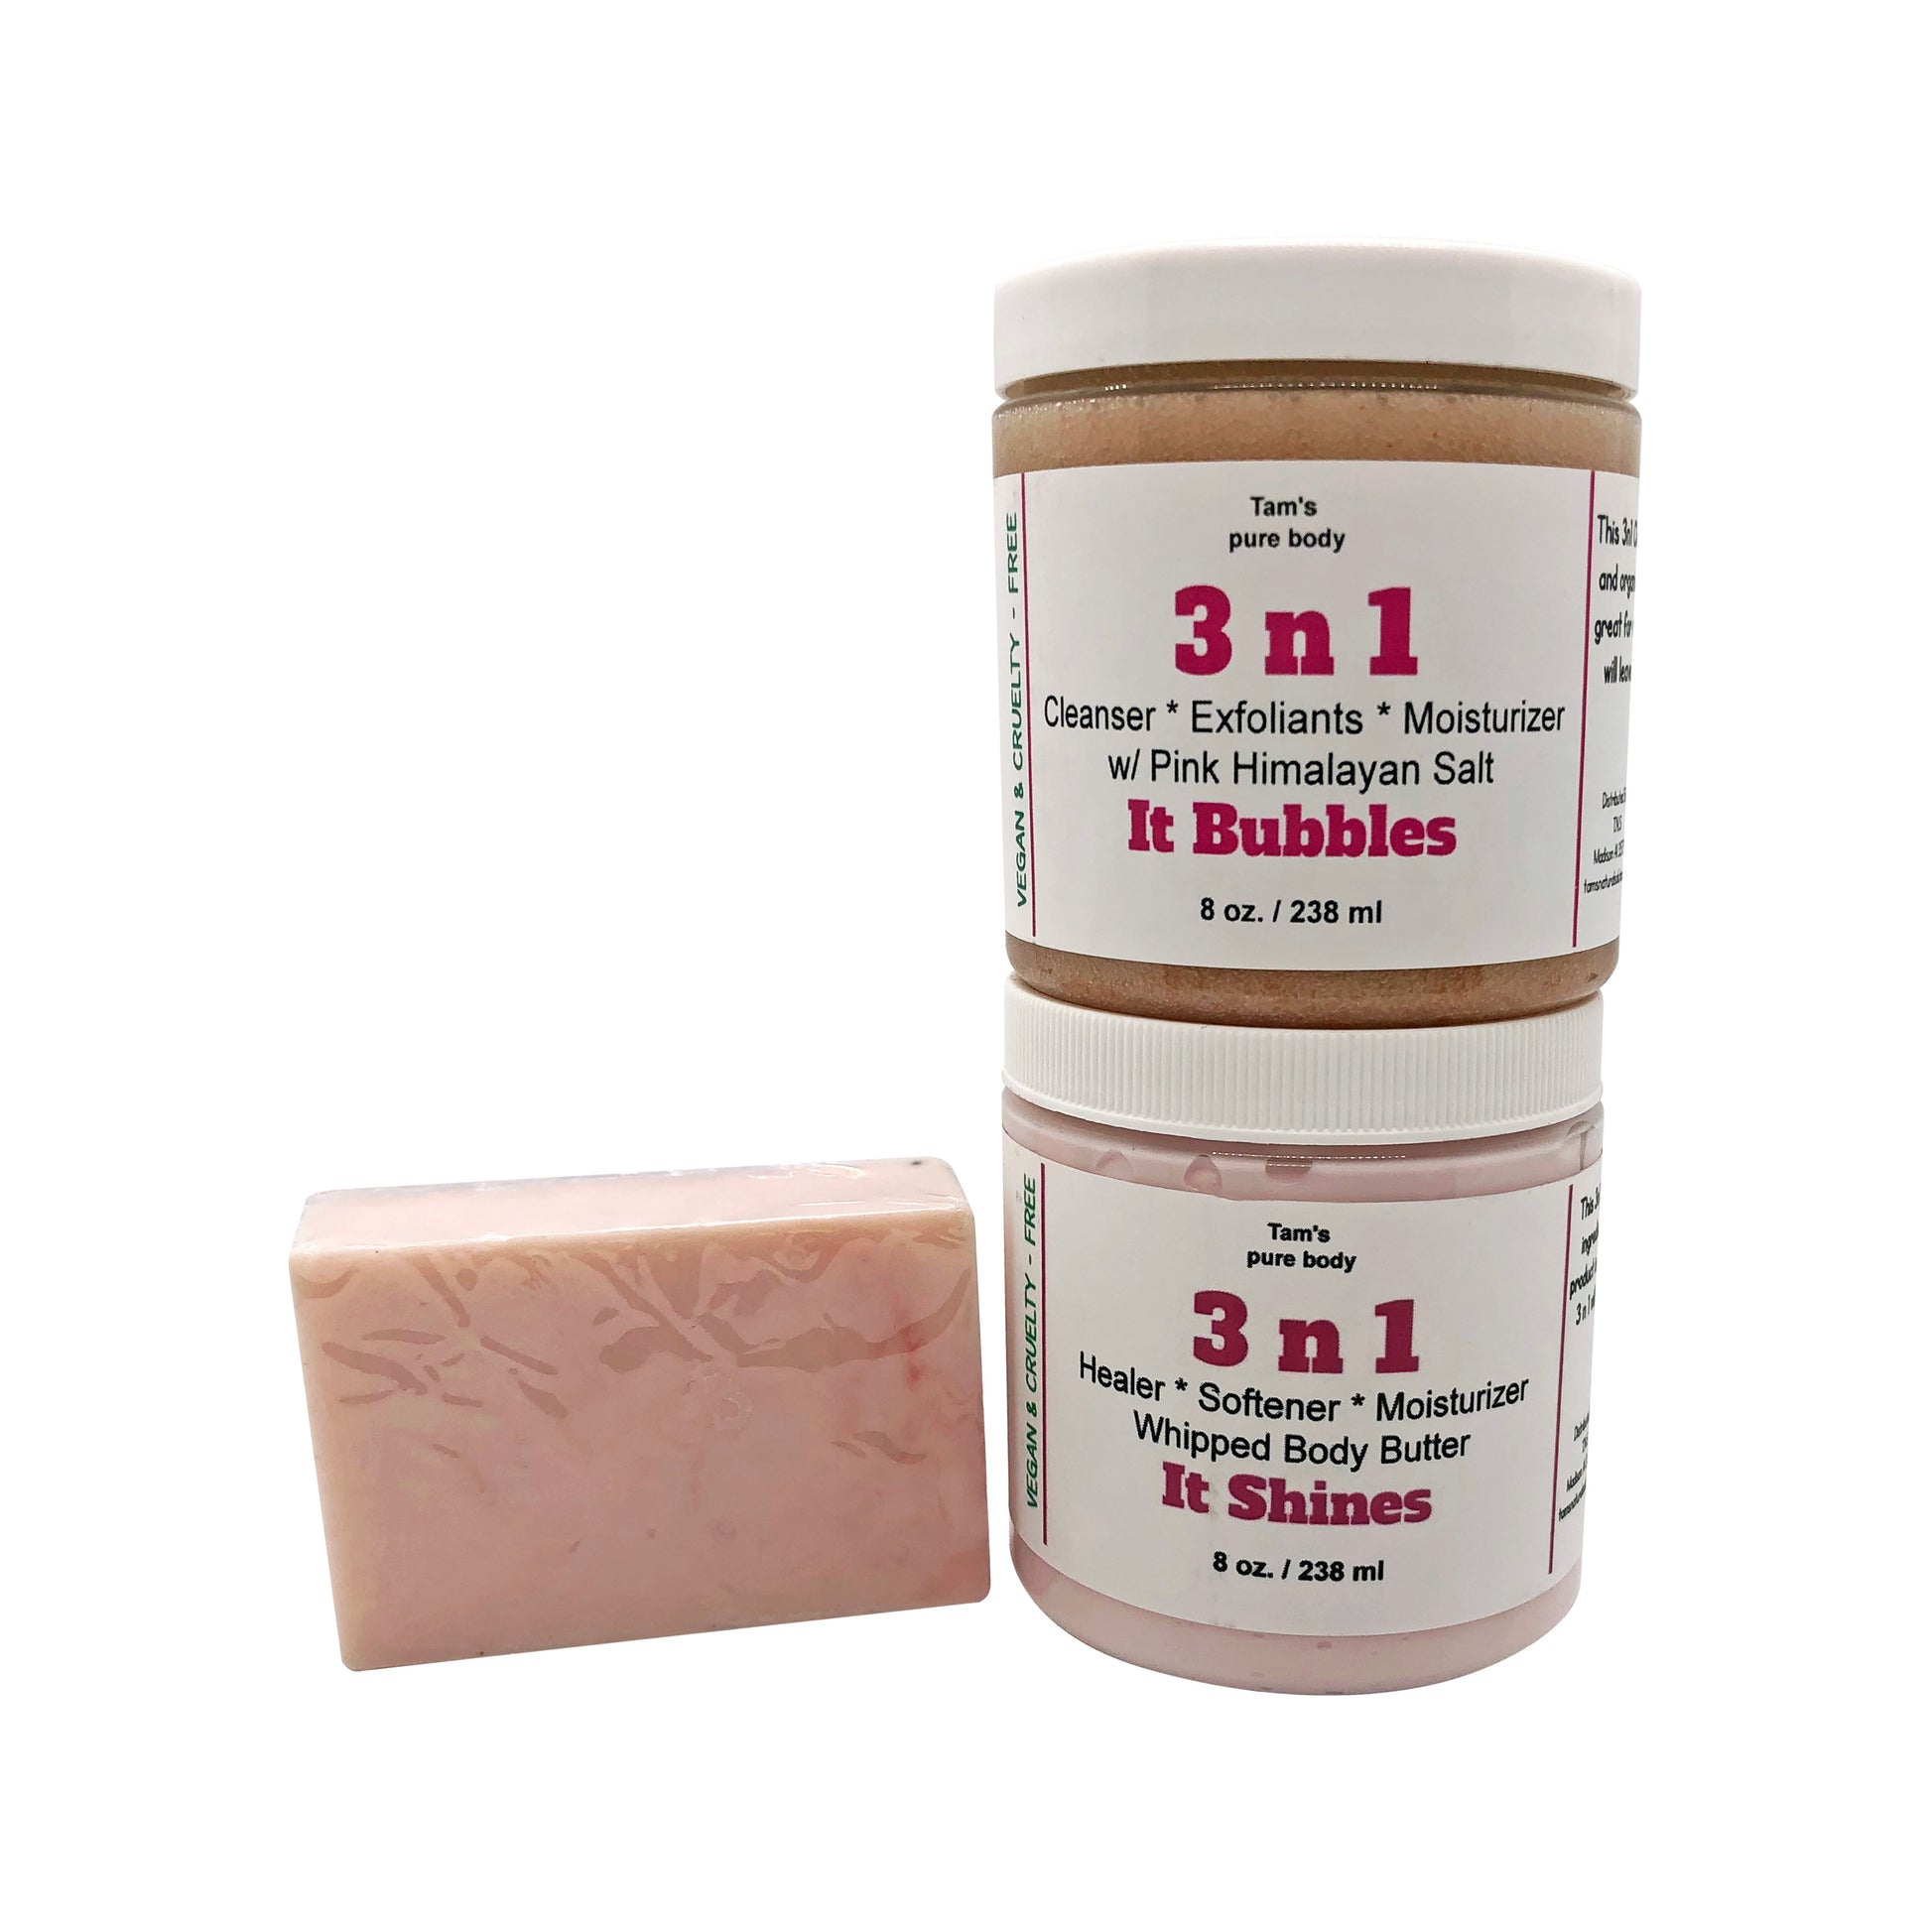 3 n 1 Kit (Clean, Exfoliate, and Moisturizer) - Tam's Natural Solutions